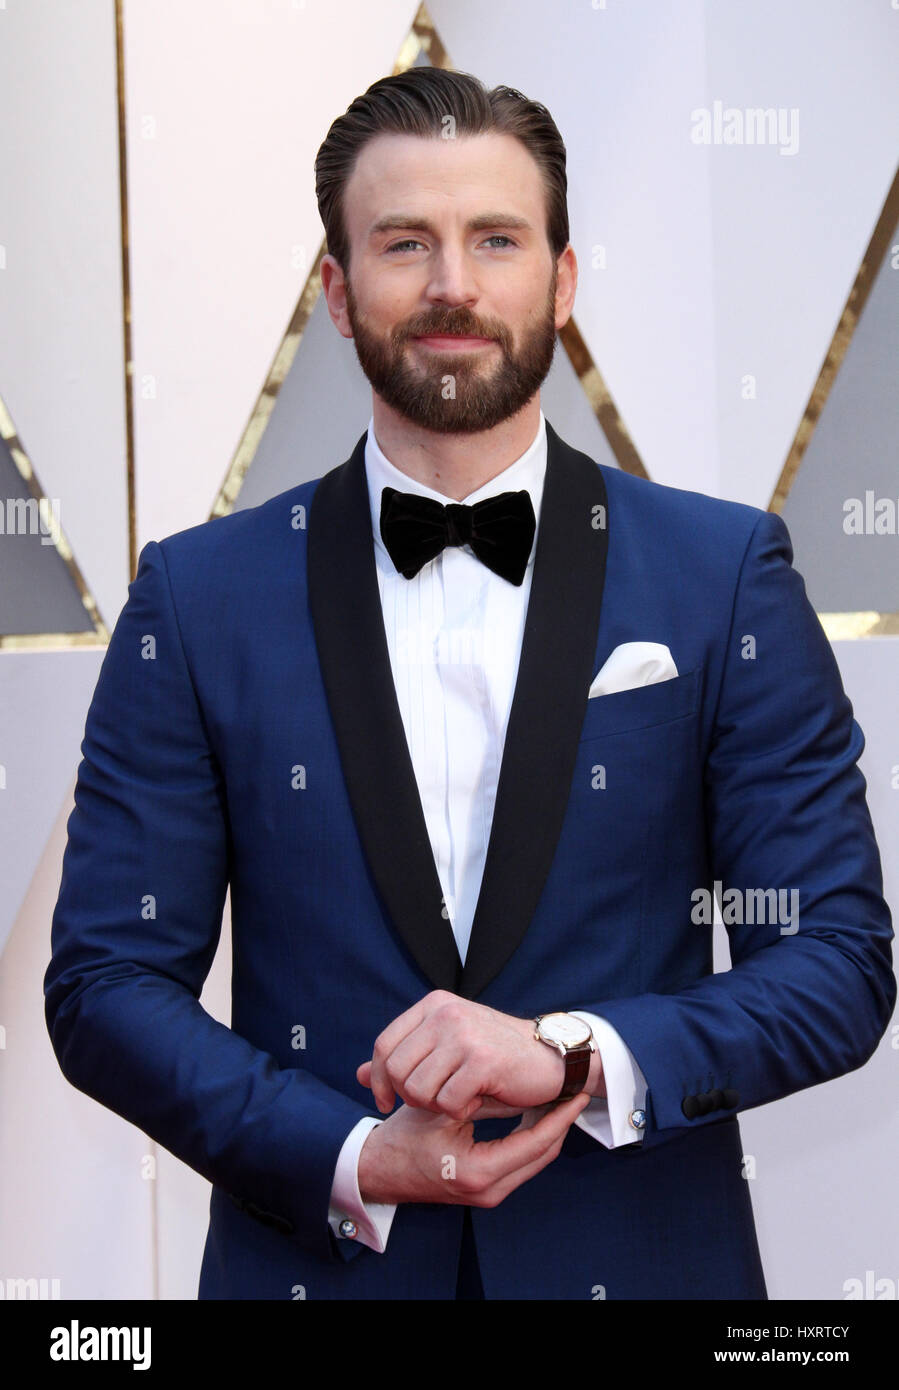 89th Annual Academy Awards held at the Dolby Theatre at the Hollywood & Highland Center  Featuring: Chris Evans Where: Los Angeles, California, United States When: 26 Feb 2017 Stock Photo